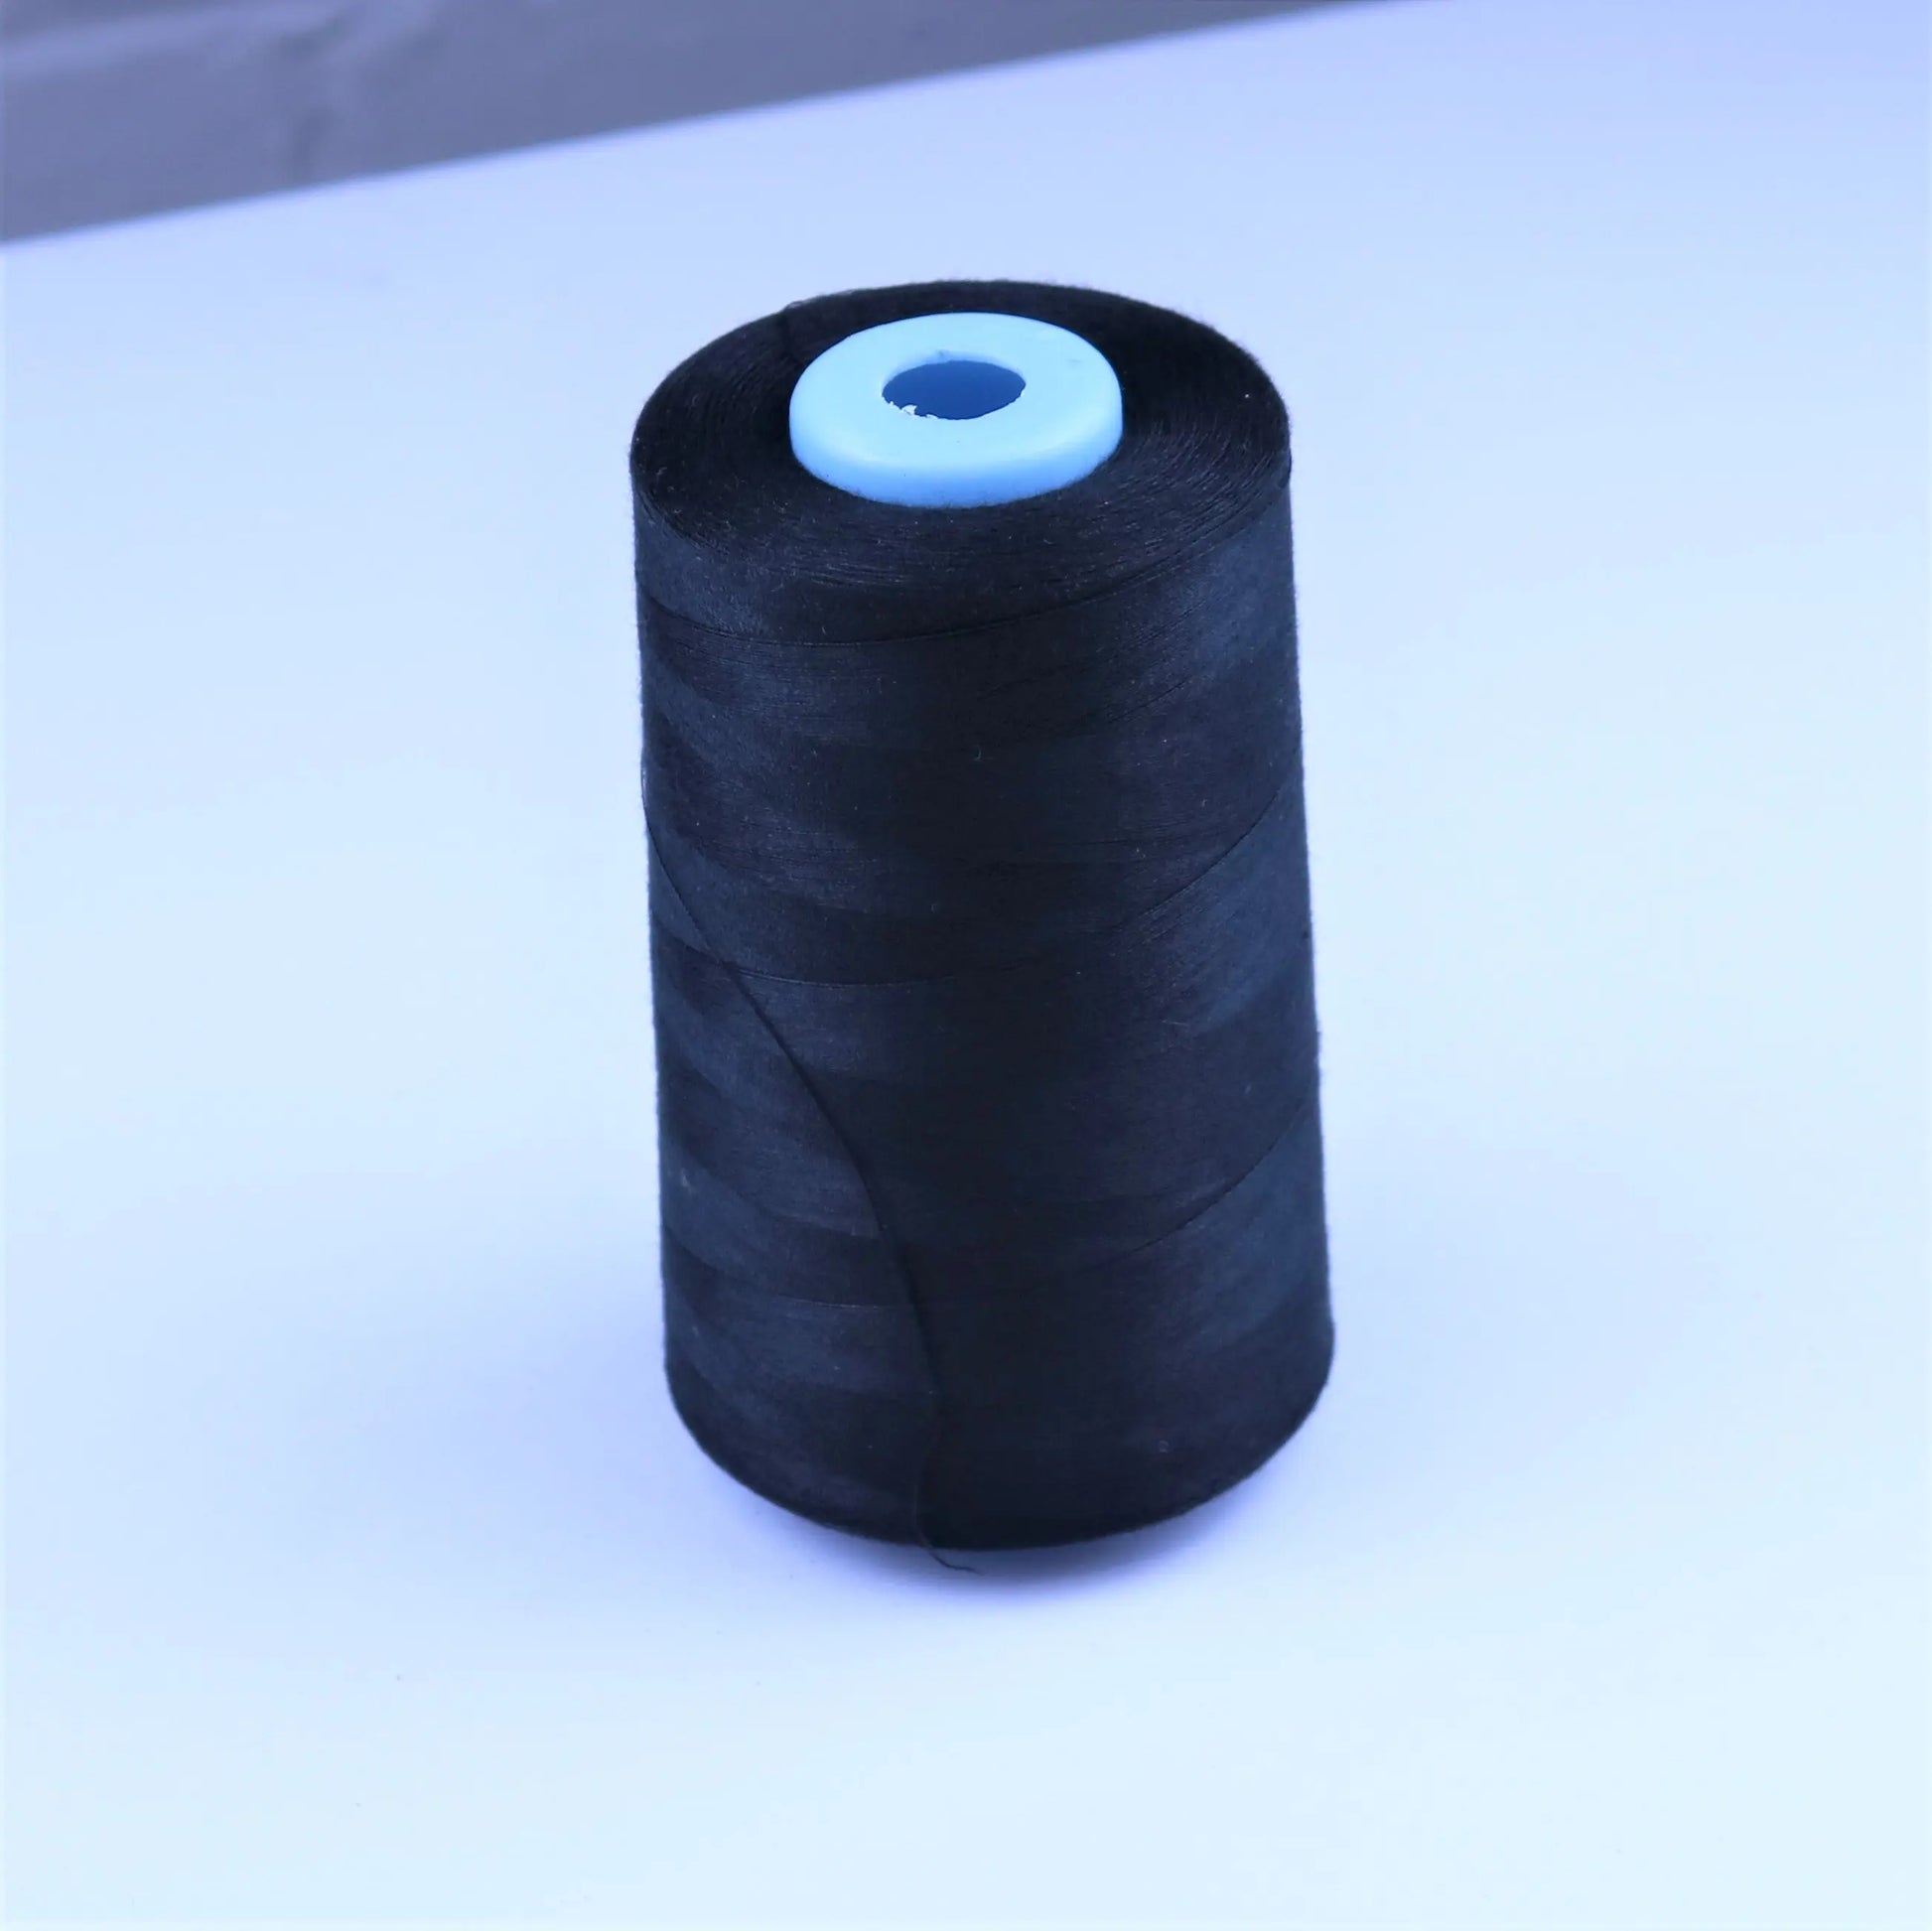 Industrial Sewing Thread | Manufacturing, Dressmaking, Tailoring